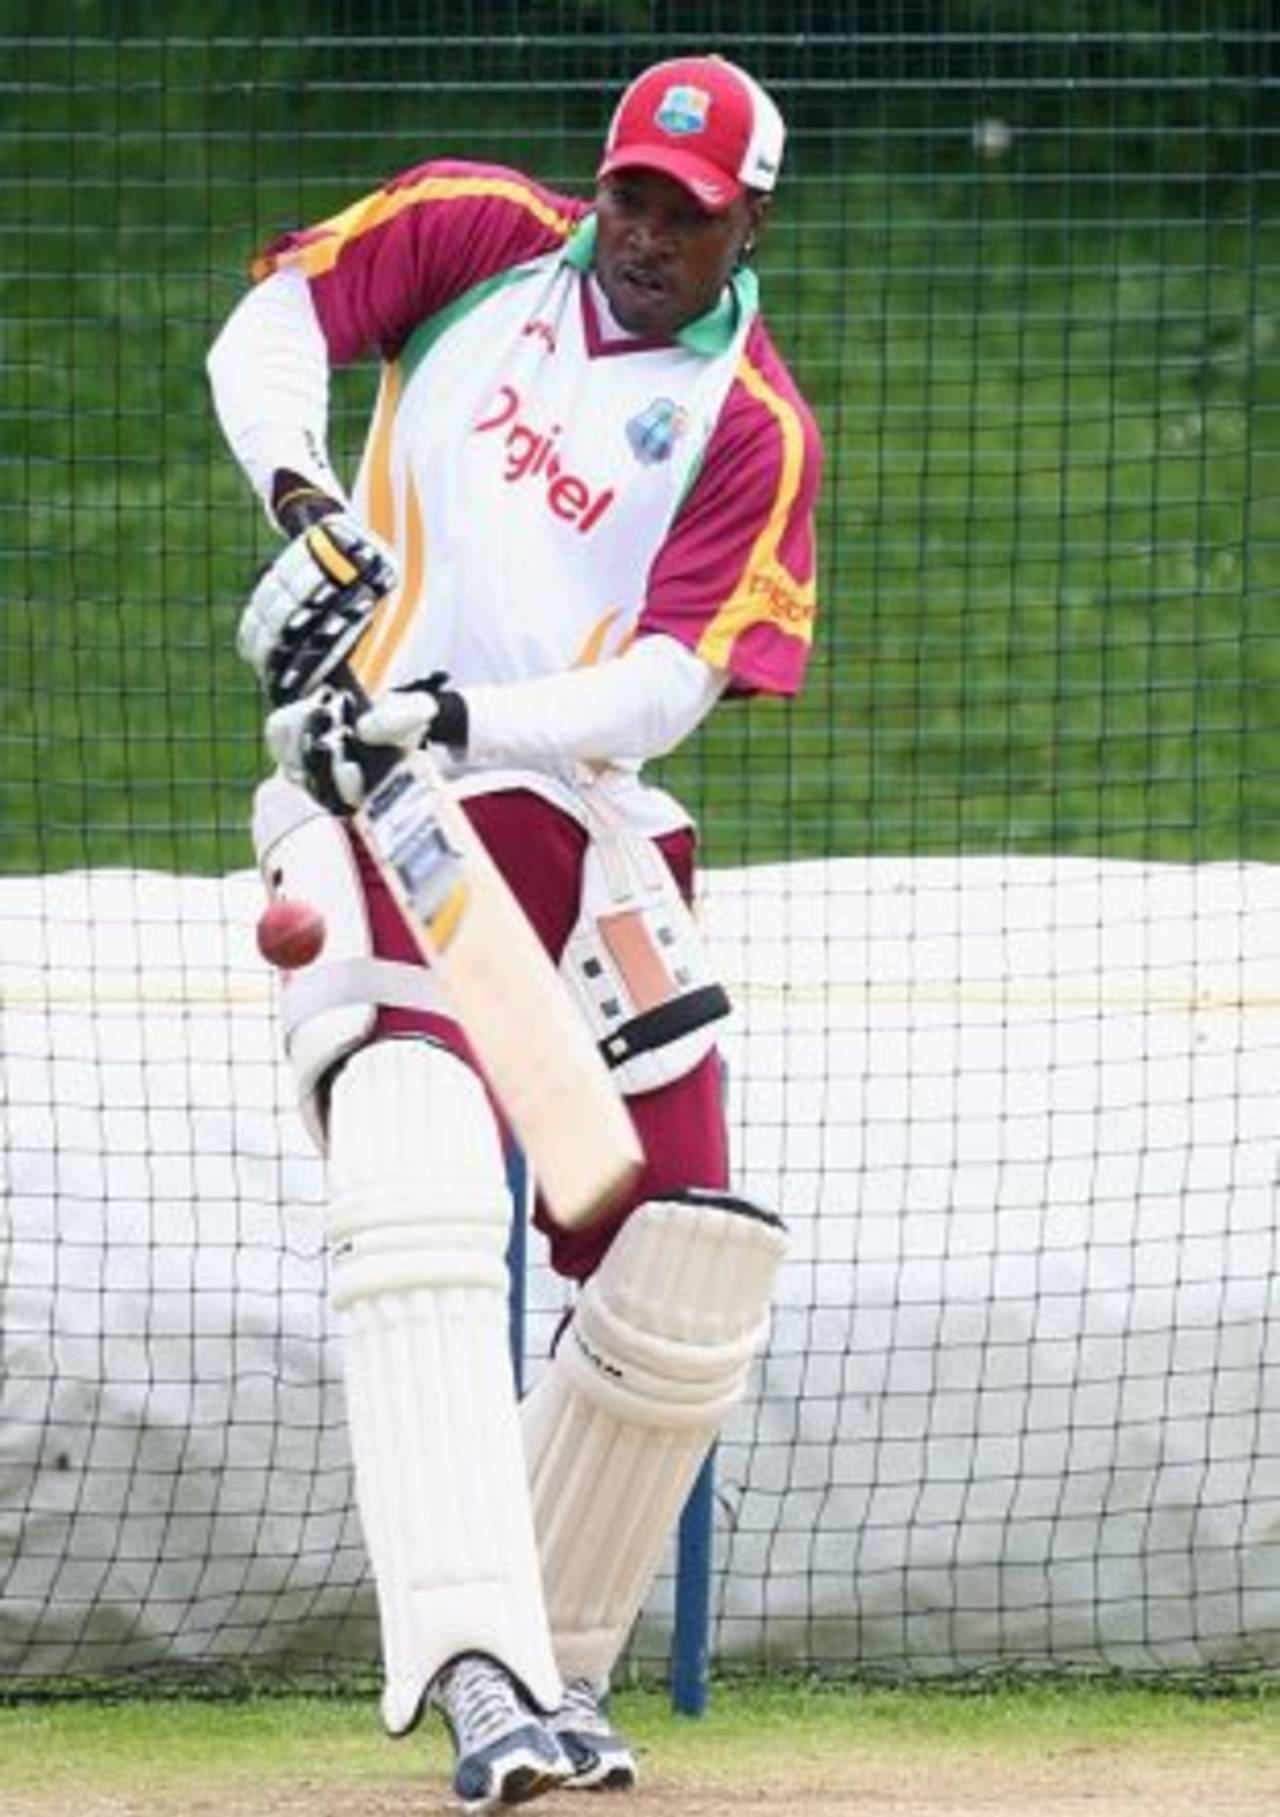 Chris Gayle bats in the nets, Chester-le-Street, May 12, 2009